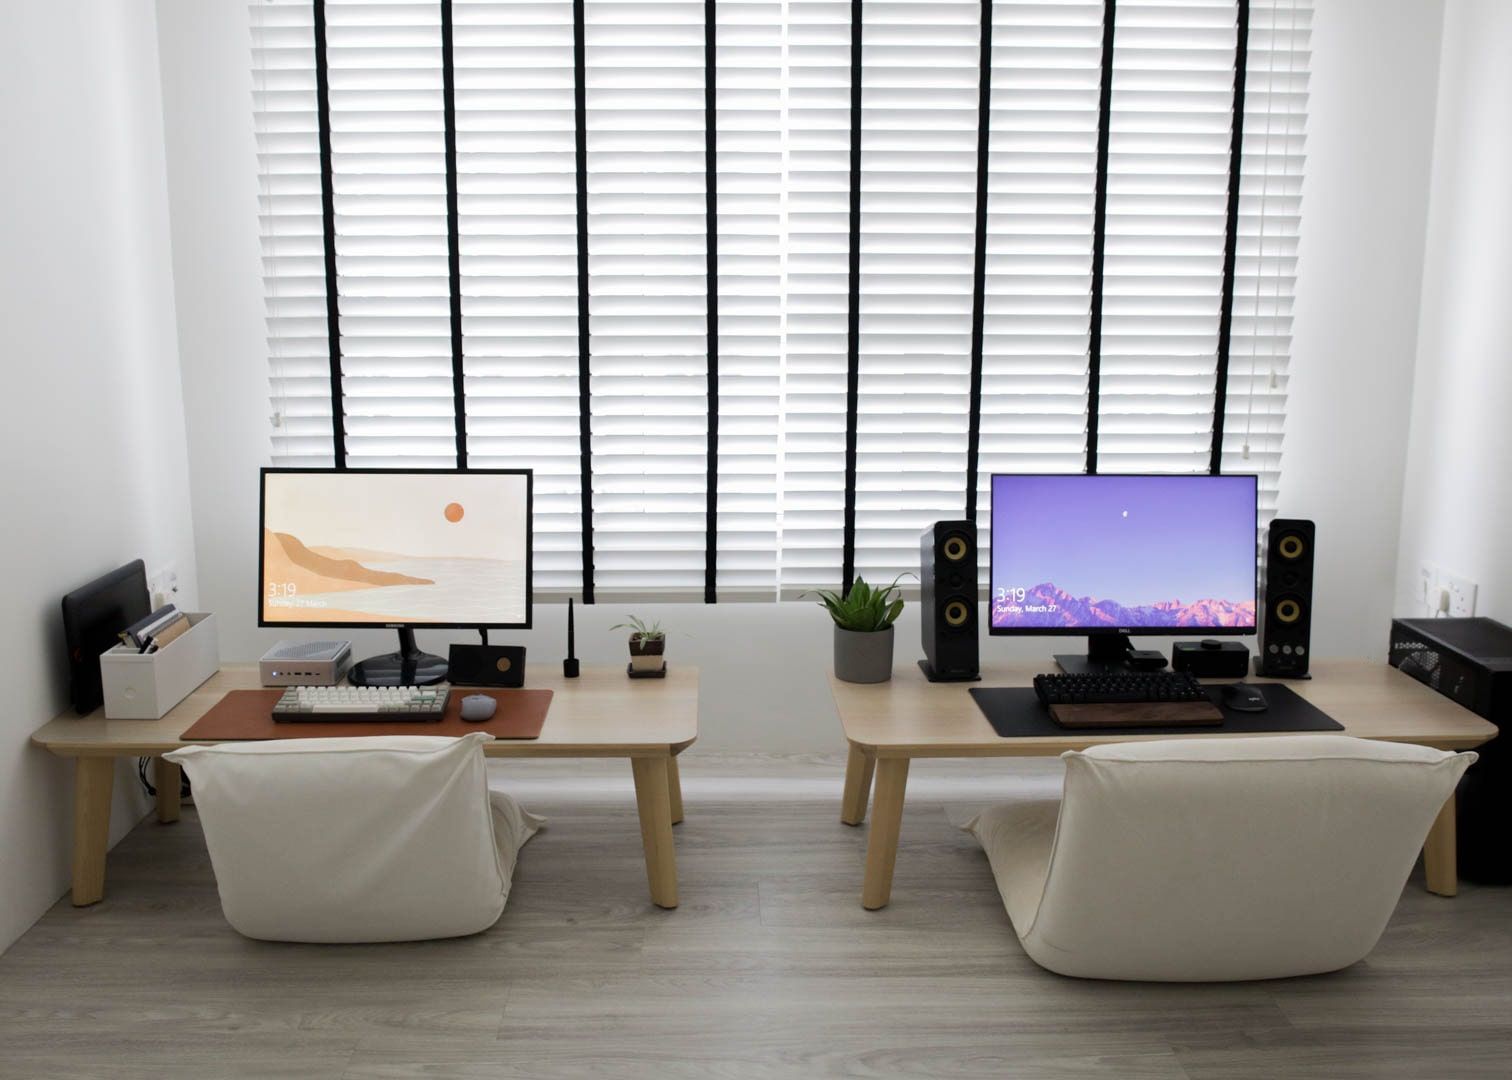 A floor chair and desk setup for two